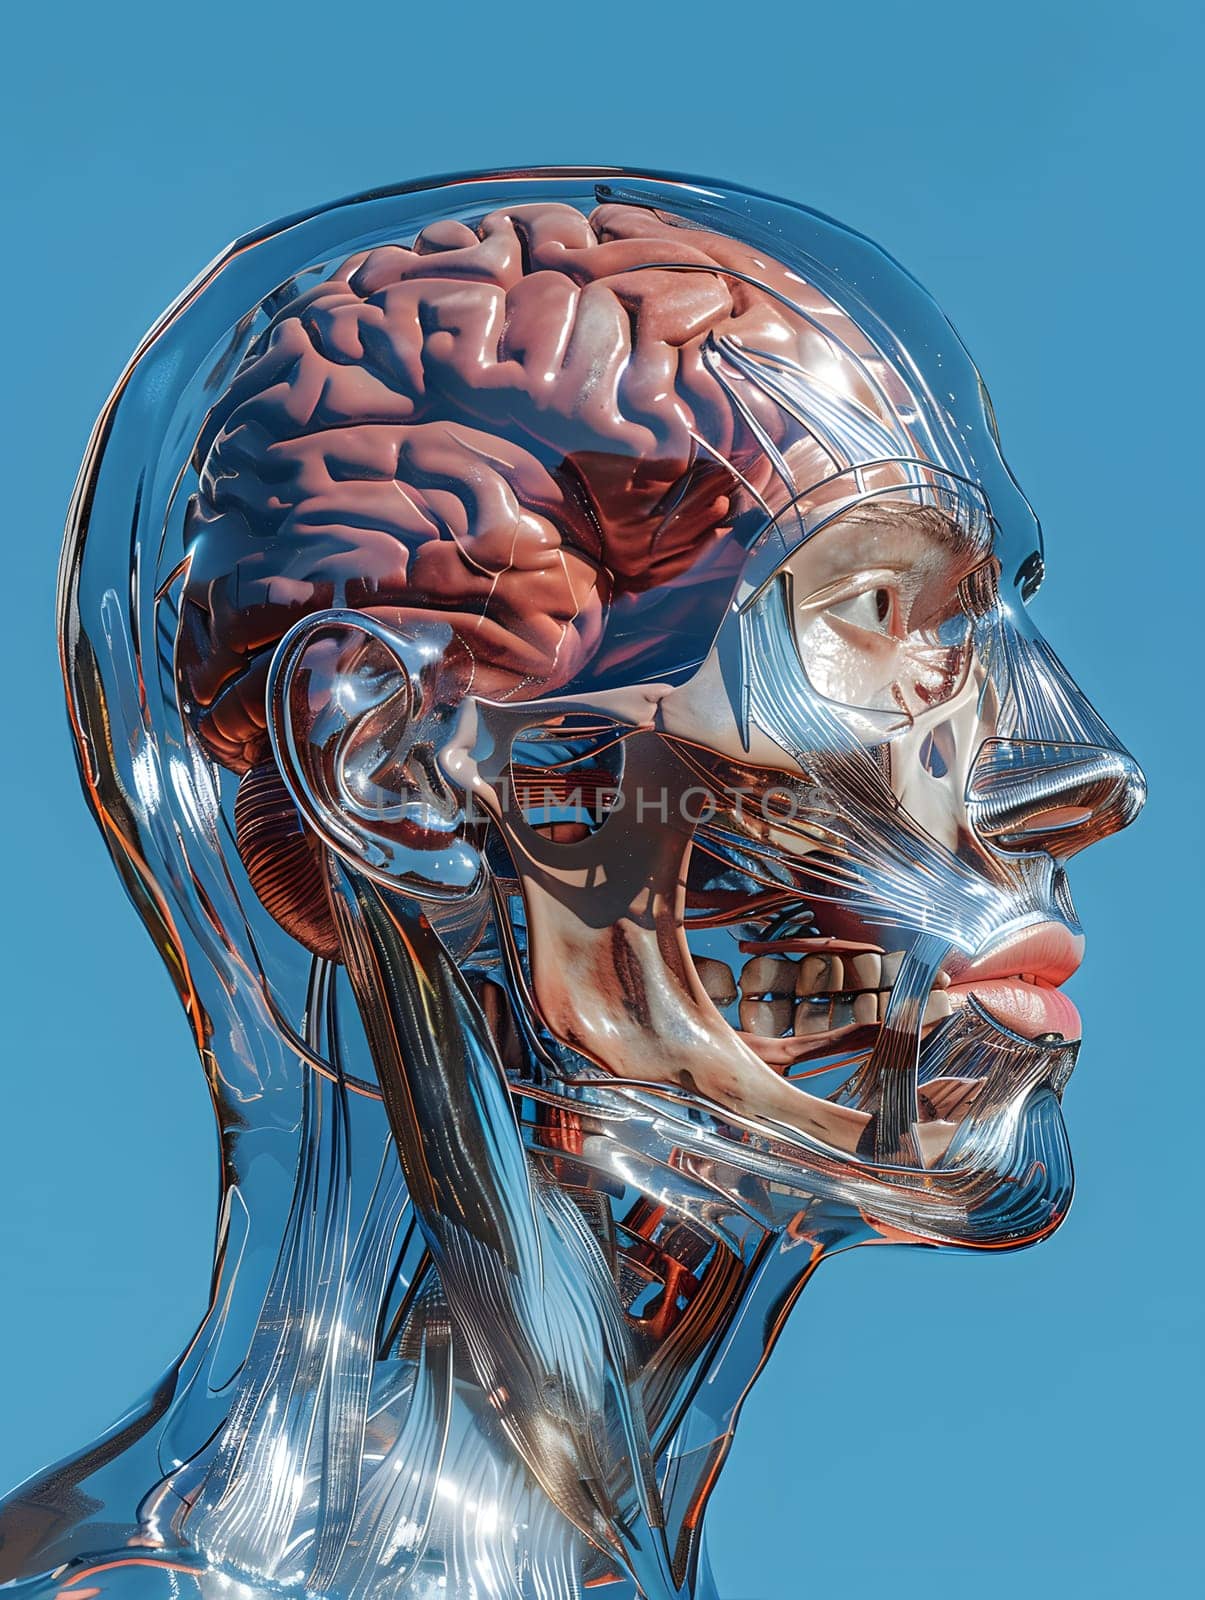 Glass head showing brain and muscles, human anatomy art piece by Nadtochiy